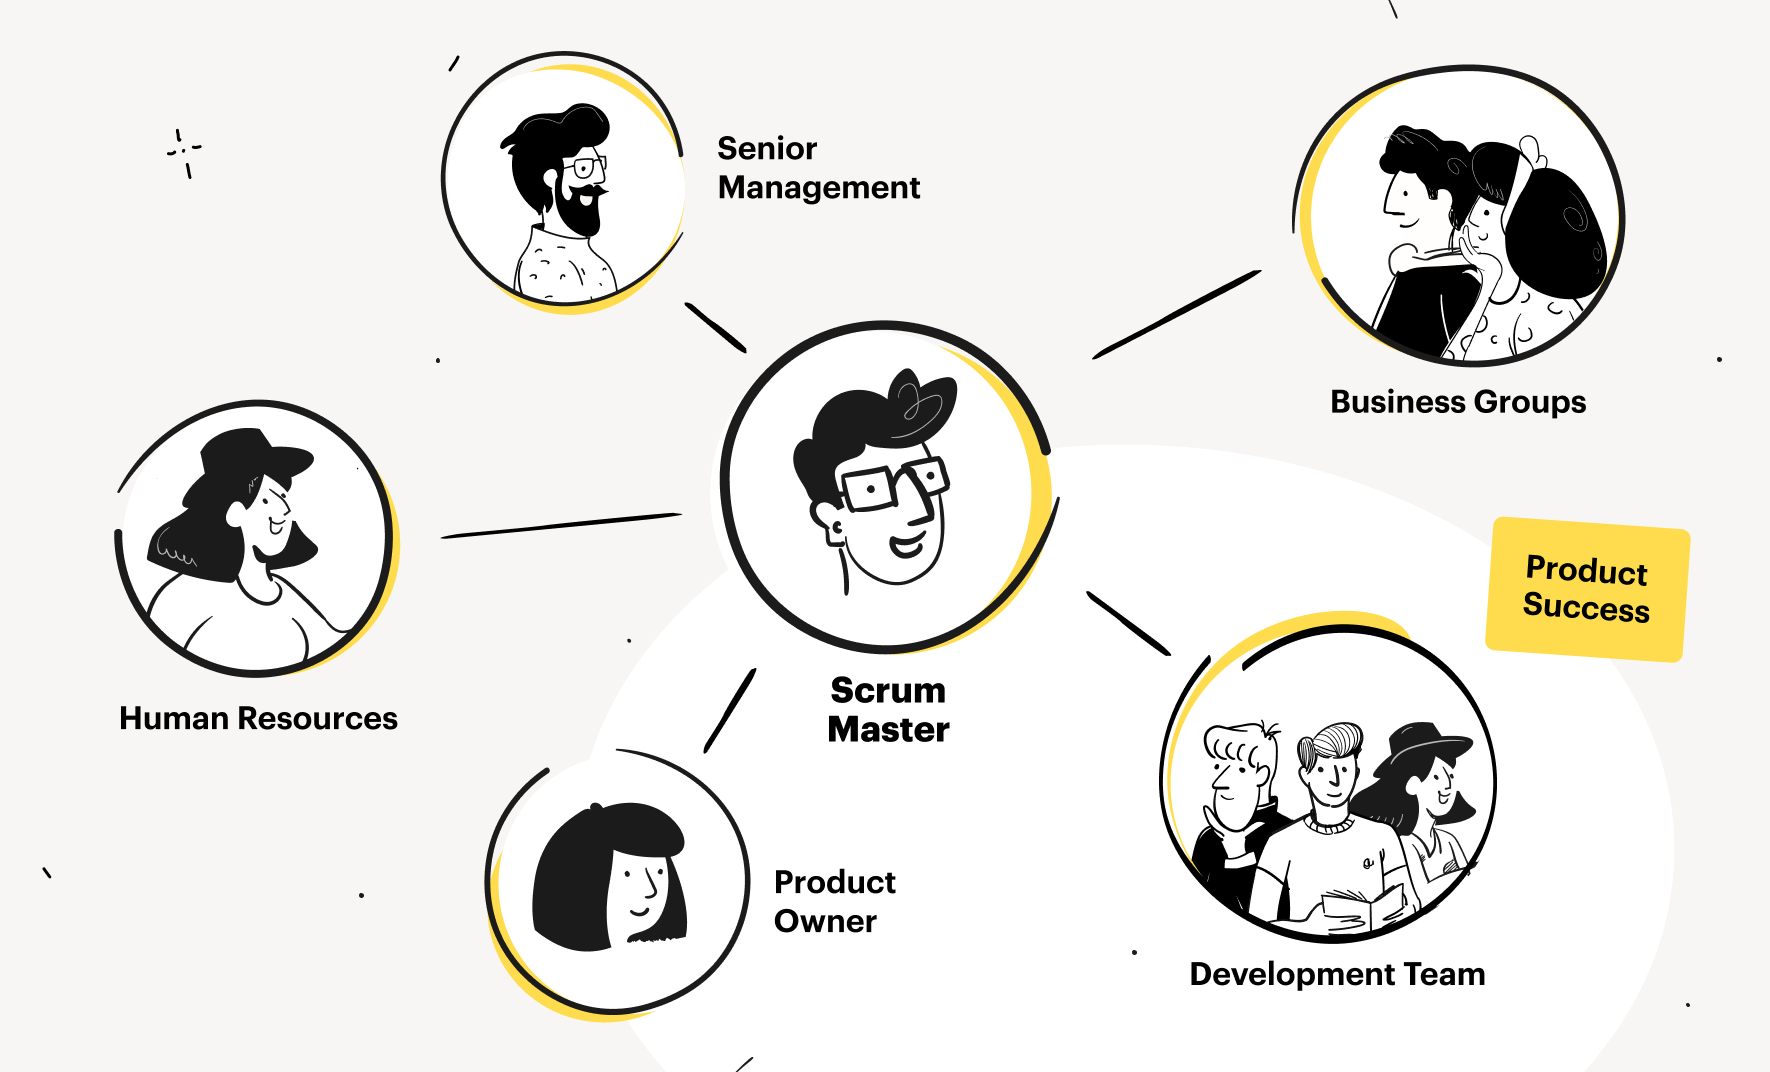 Scrum Master Role explained